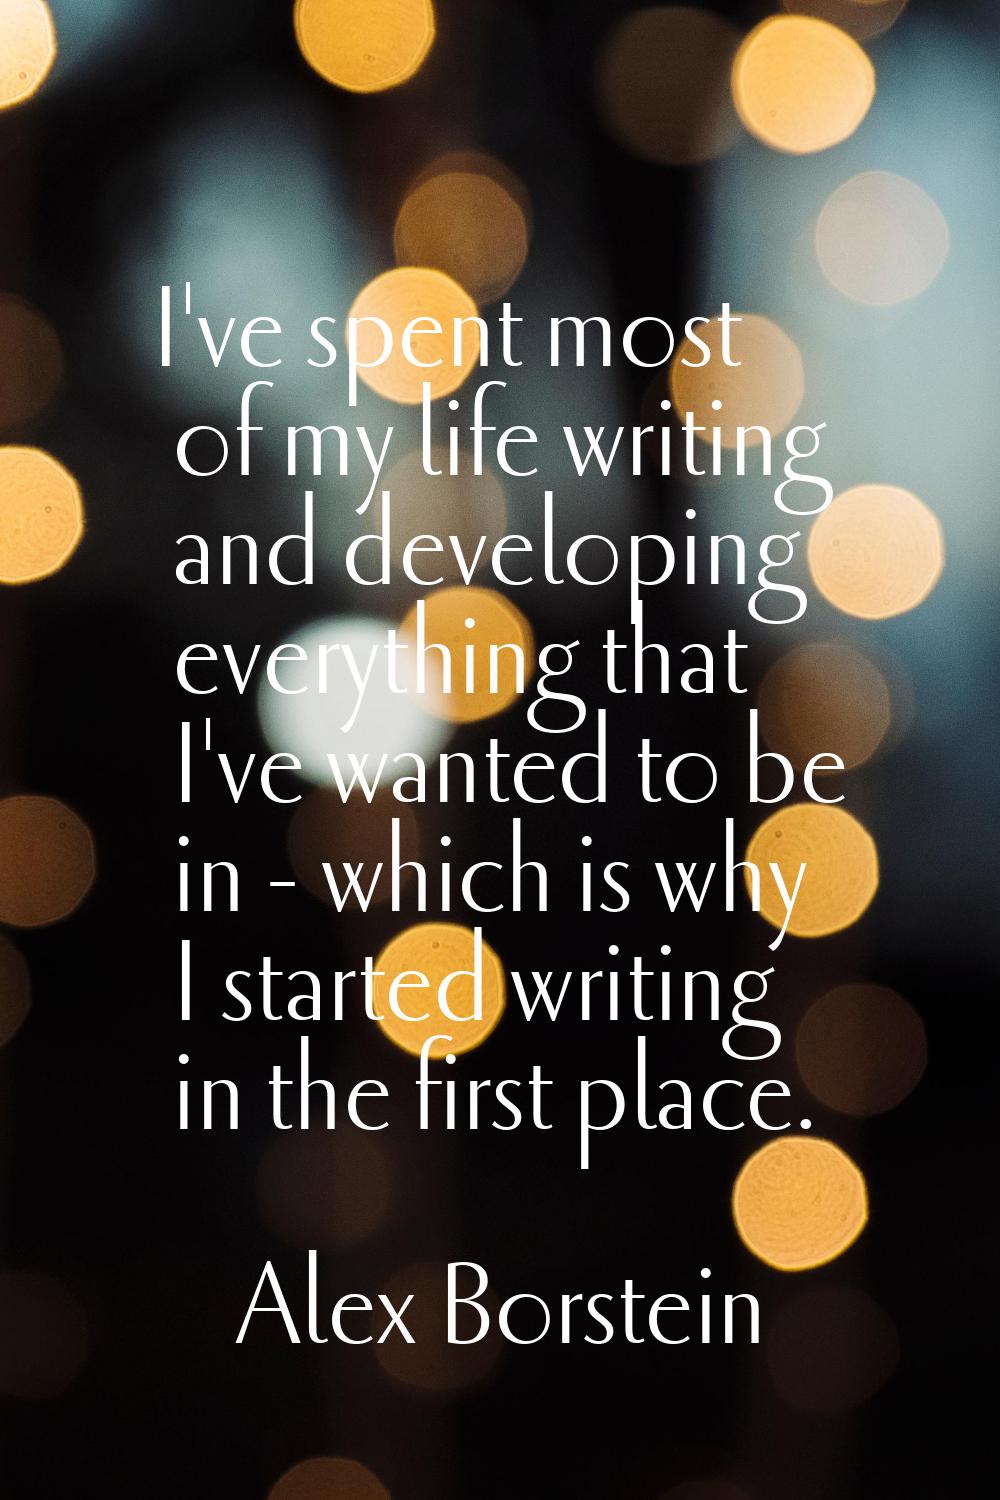 I've spent most of my life writing and developing everything that I've wanted to be in - which is w